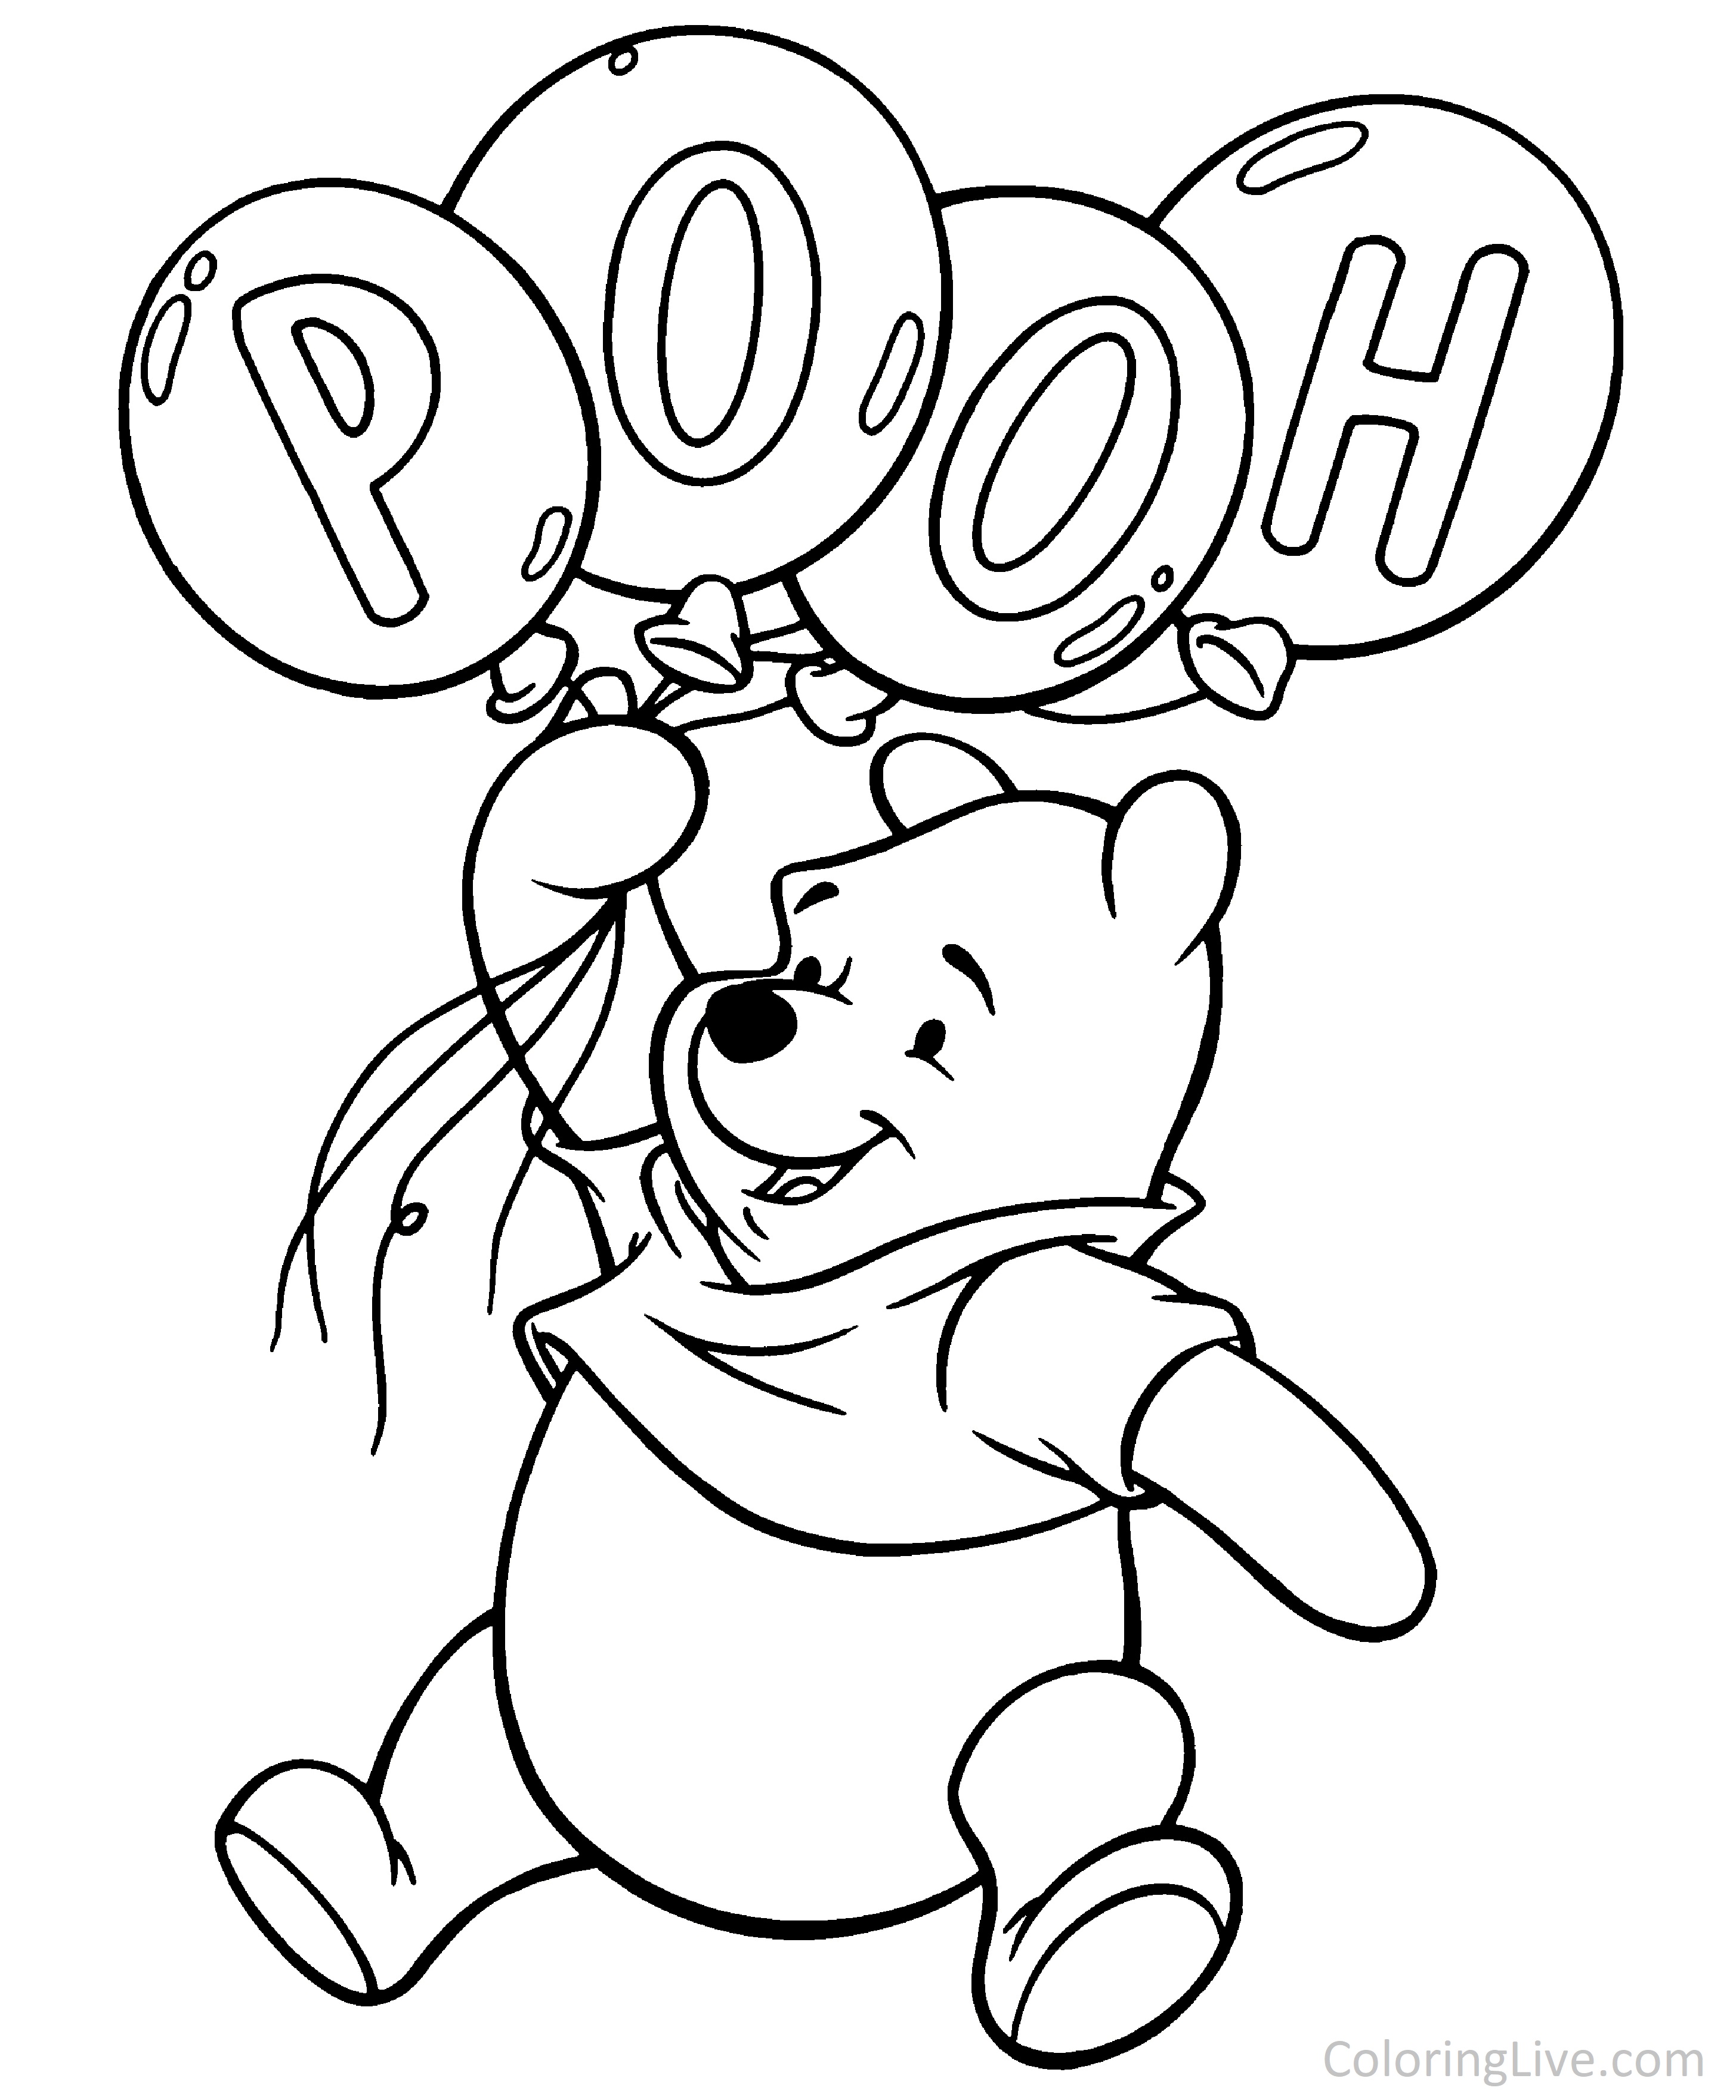 Printable Pooh Baloons Coloring Page for kids.